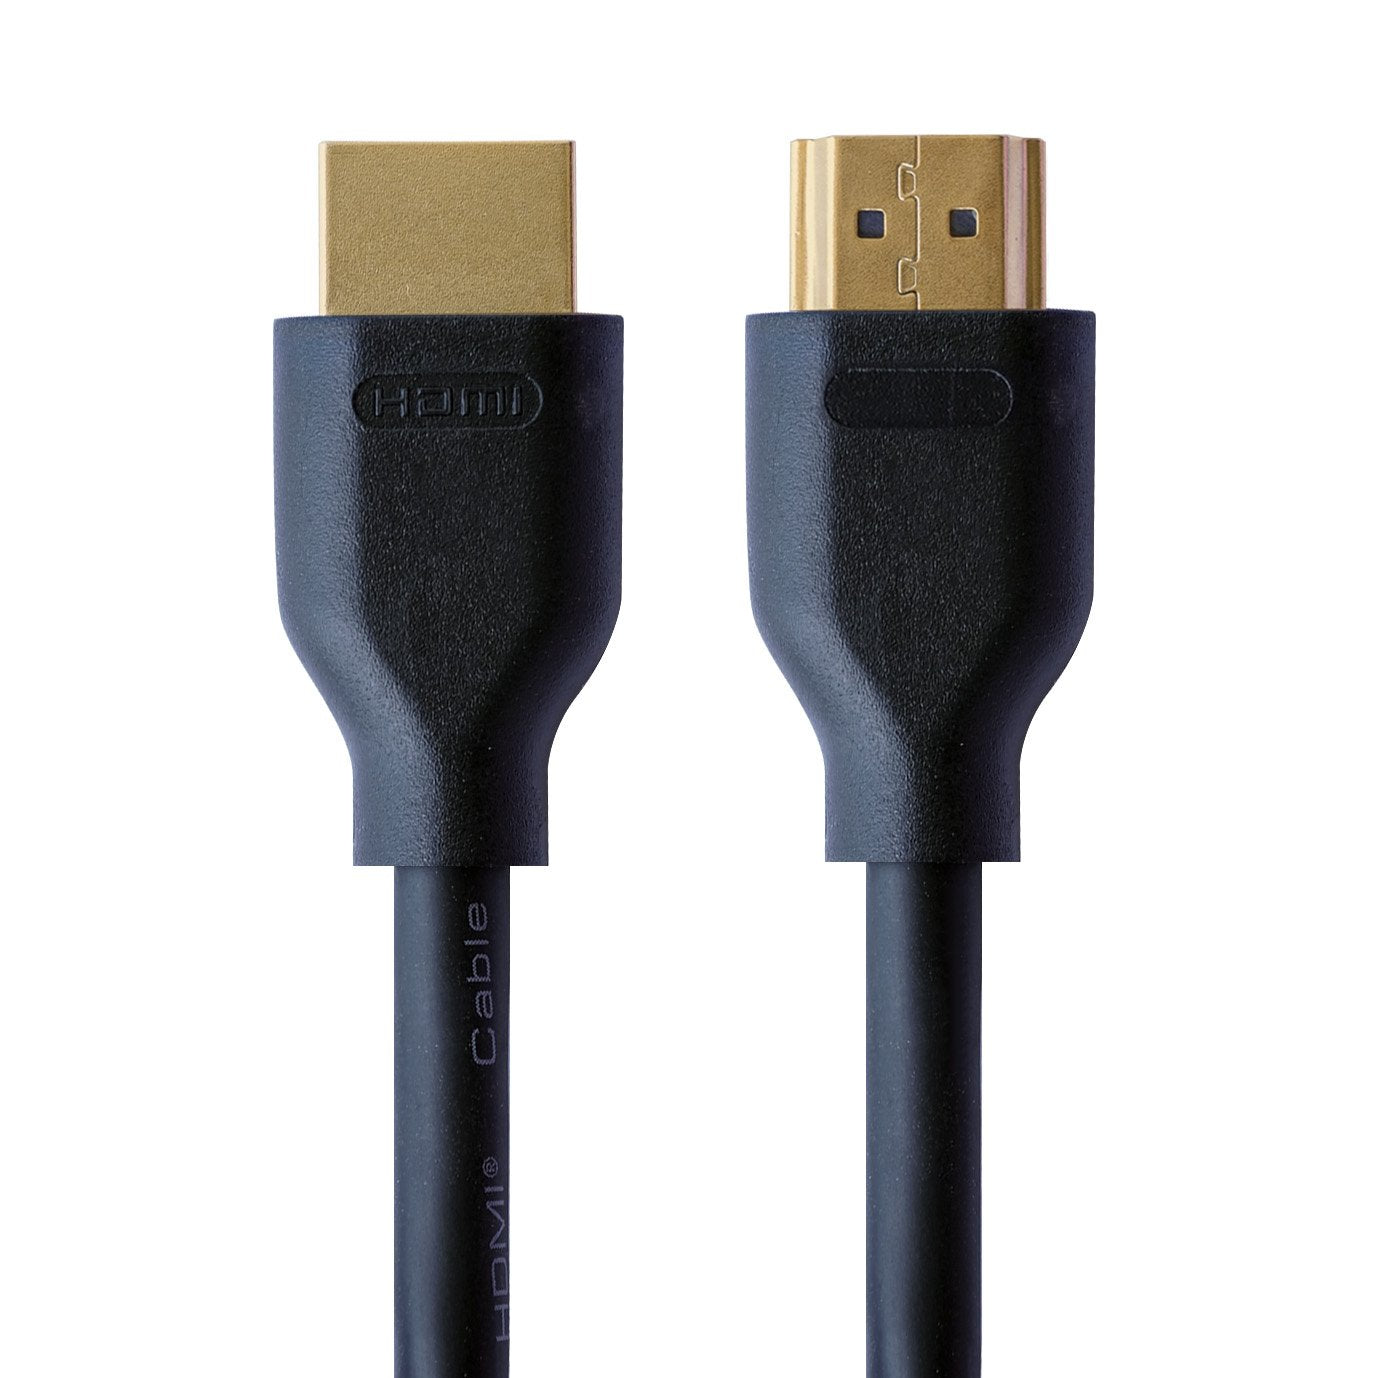 1.5m Ultra High Speed Premium HDMI Cable / Lead v2.1 - 48Gbps/ 8K/ 60Hz (C-HDMI2.1-1.5)